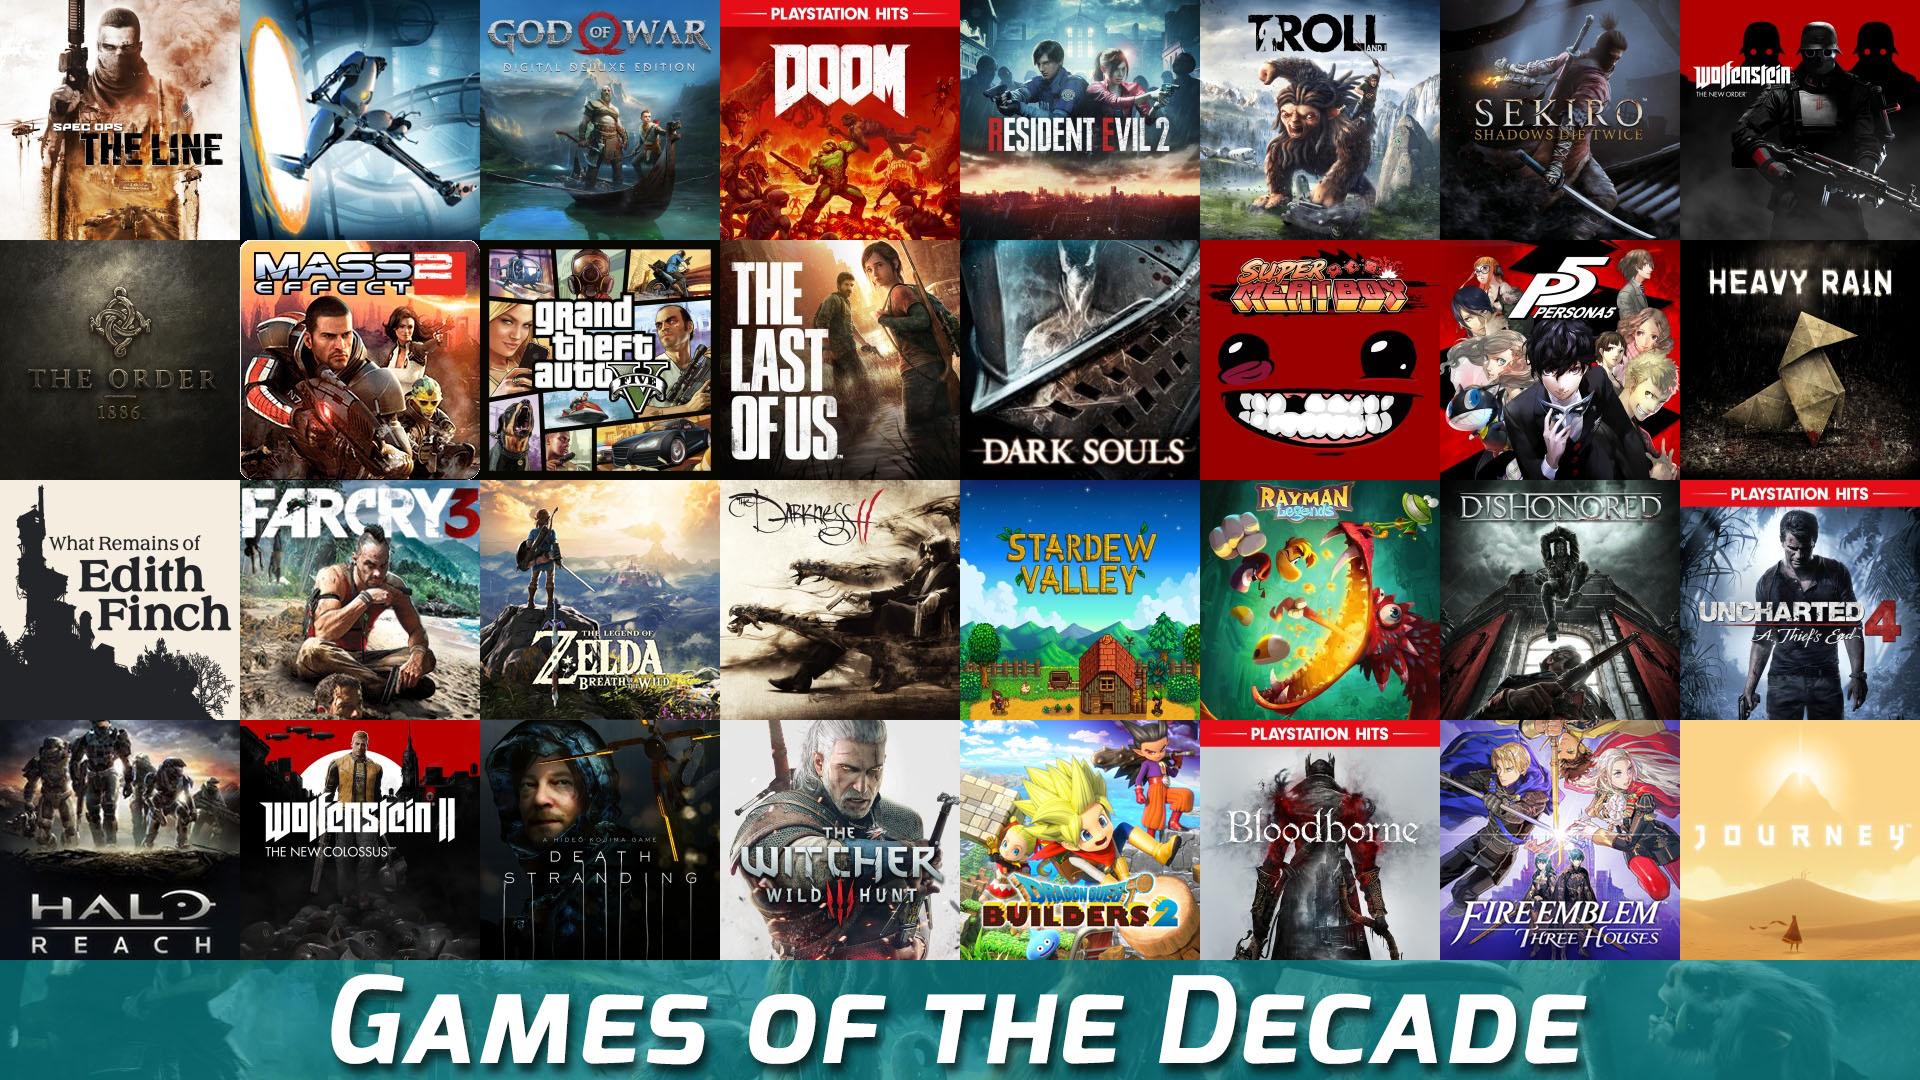 WellPlayed's Games Of The Decade